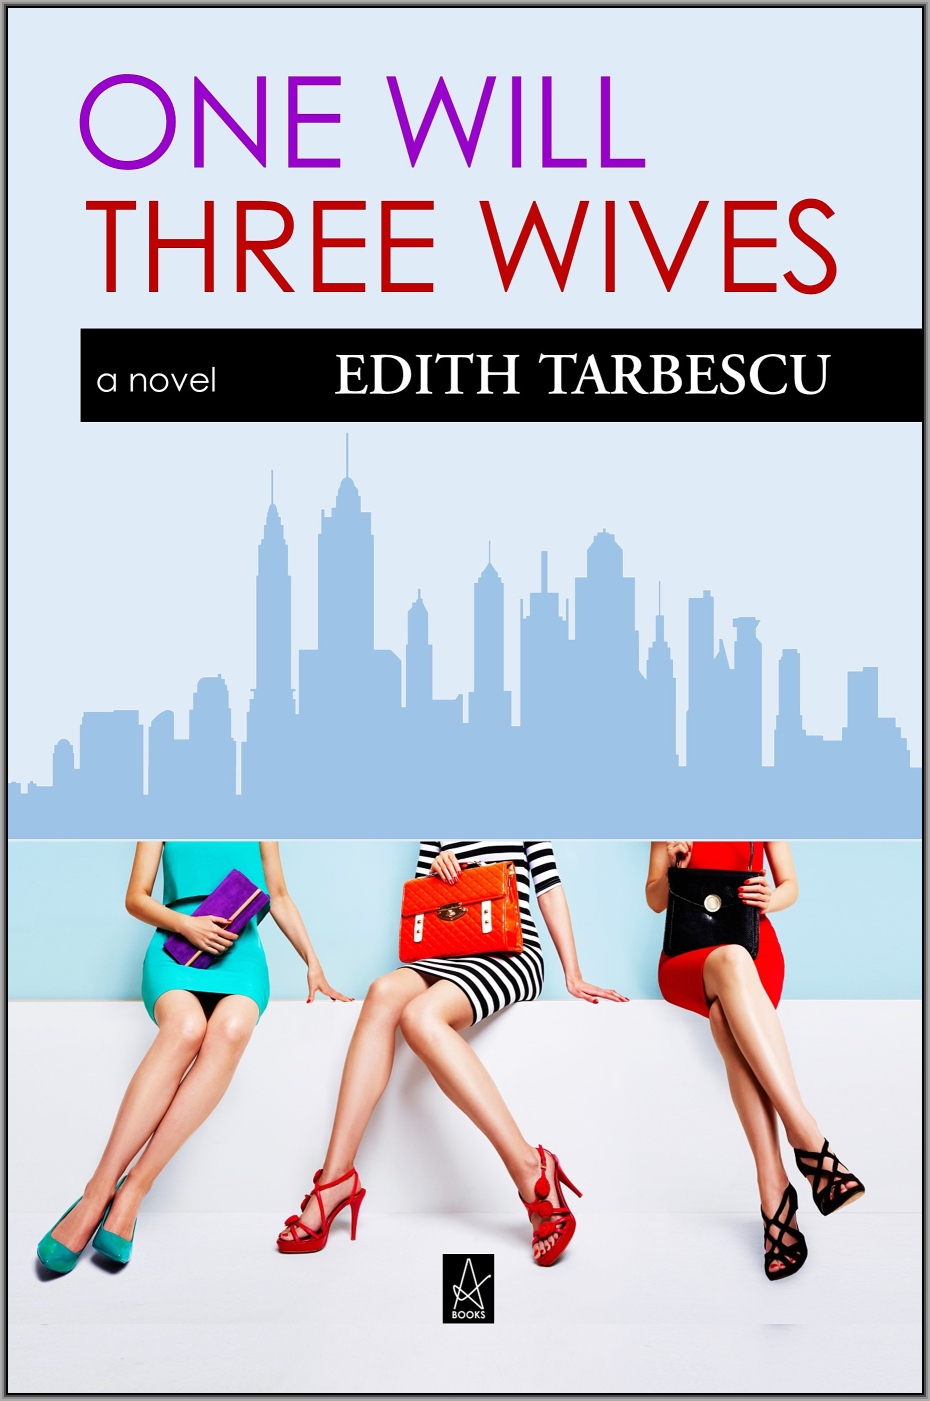 One Will: Three Wives